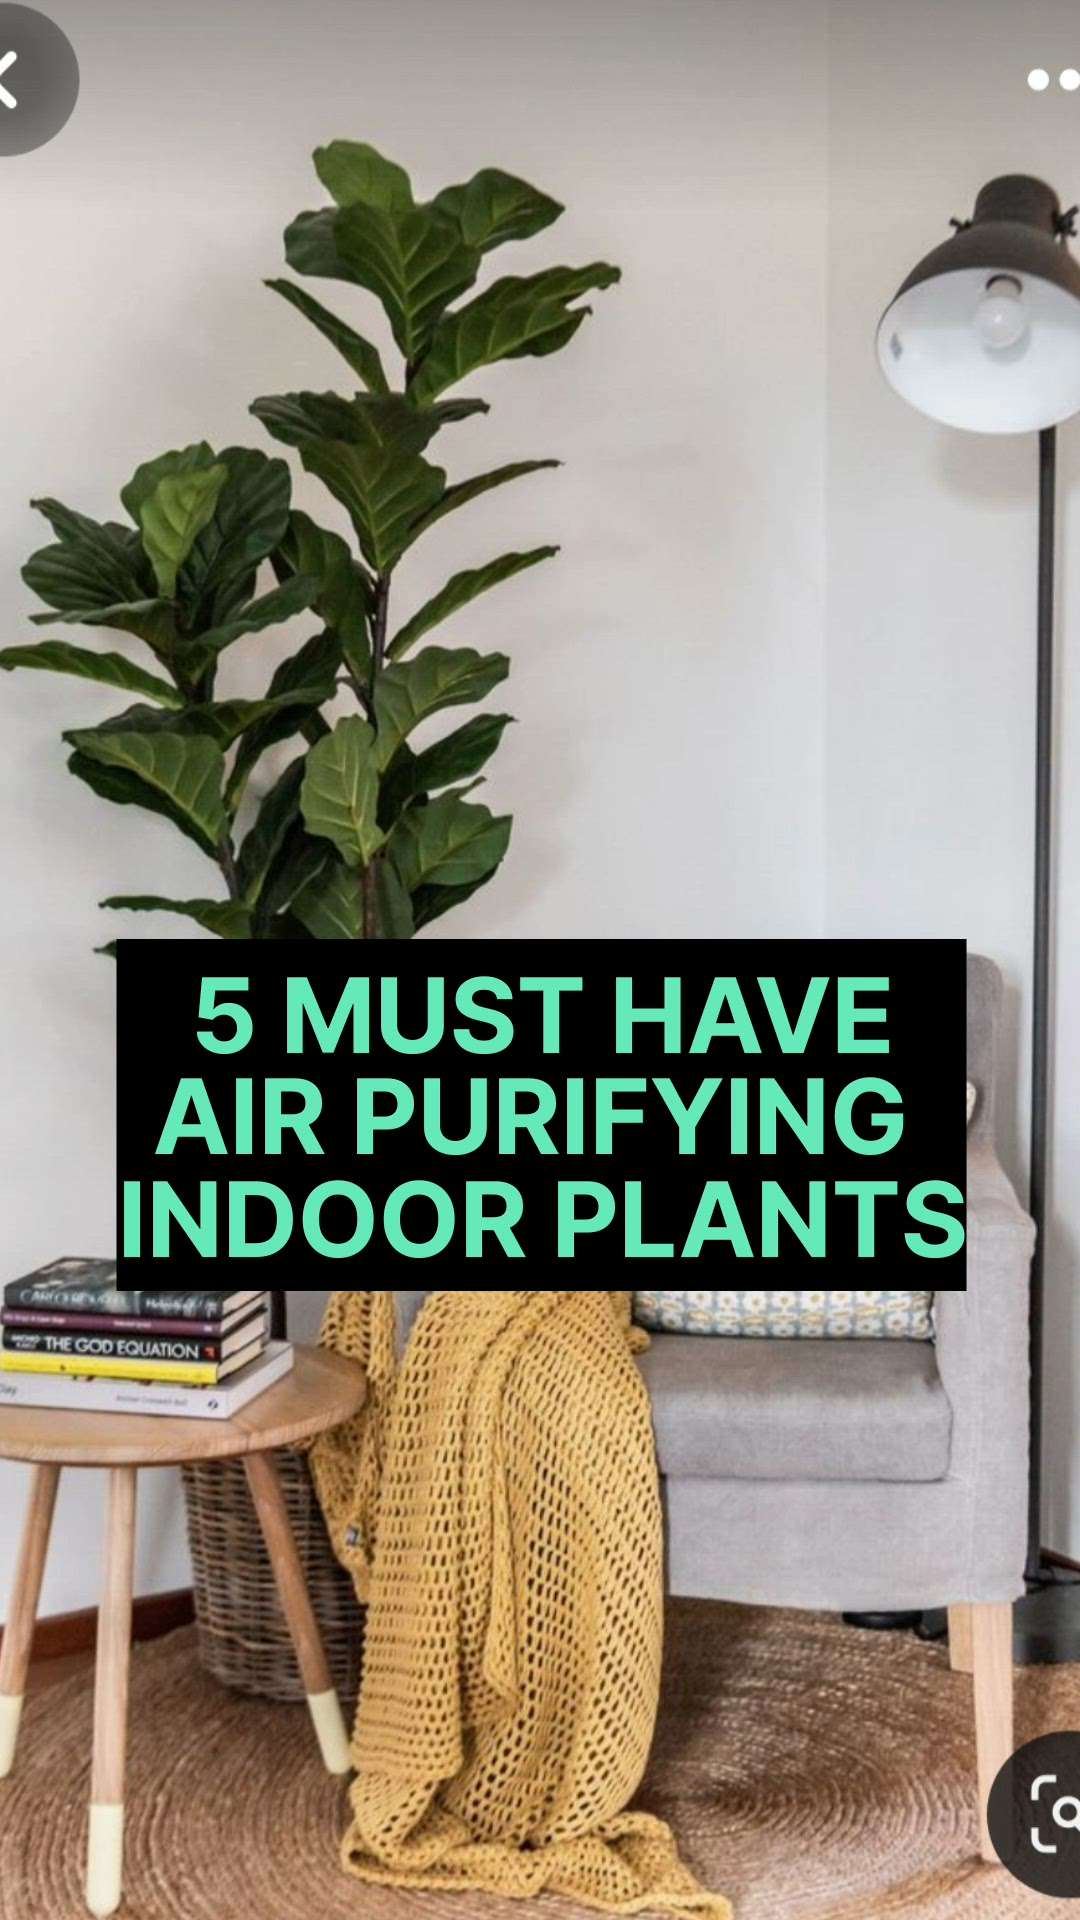 5 must have air purifying indoor plants 
tips for natural air filtration 
5 MUST HAVE ESSENTIALS FOR YOUR HOME 
#creatorsofkolo #musthave #home #kitchenideas #modernhome #ideas #essentials #musthaves #IndoorPlants #plants #tips #airpurifier #airpurifierplants